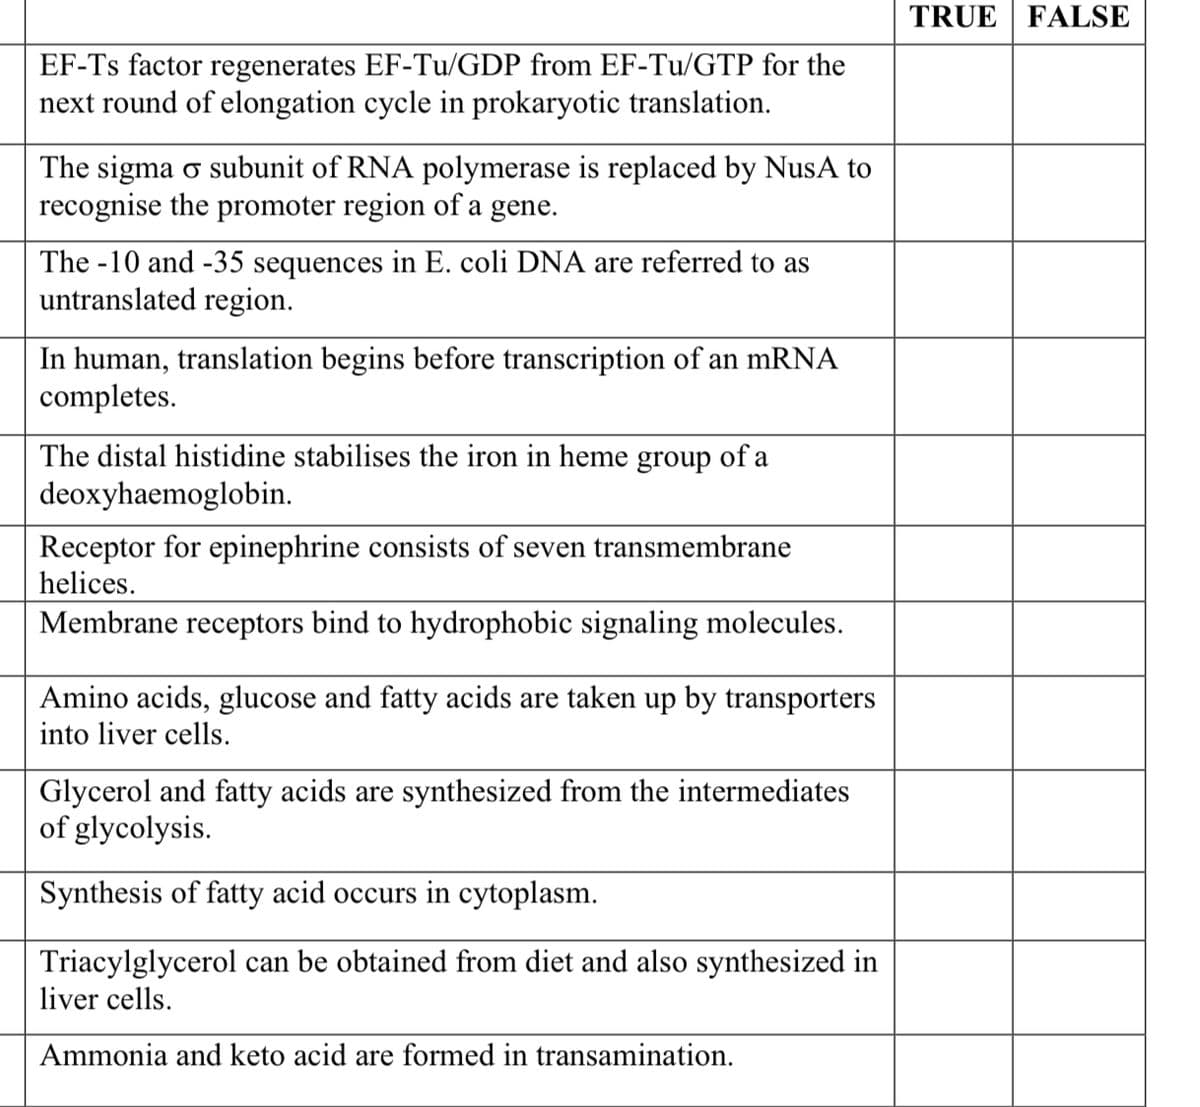 TRUE FALSE
EF-Ts factor regenerates EF-Tu/GDP from EF-Tu/GTP for the
next round of elongation cycle in prokaryotic translation.
The sigma o subunit of RNA polymerase is replaced by NusA to
recognise the promoter region of a gene.
The -10 and -35 sequences in E. coli DNA are referred to as
untranslated region.
In human, translation begins before transcription of an mRNA
completes.
The distal histidine stabilises the iron in heme group of a
deoxyhaemoglobin.
Receptor for epinephrine consists of seven transmembrane
helices.
Membrane receptors bind to hydrophobic signaling molecules.
Amino acids, glucose and fatty acids are taken up by transporters
into liver cells.
Glycerol and fatty acids are synthesized from the intermediates
of glycolysis.
Synthesis of fatty acid occurs in cytoplasm.
Triacylglycerol can be obtained from diet and also synthesized in
liver cells.
Ammonia and keto acid are formed in transamination.
